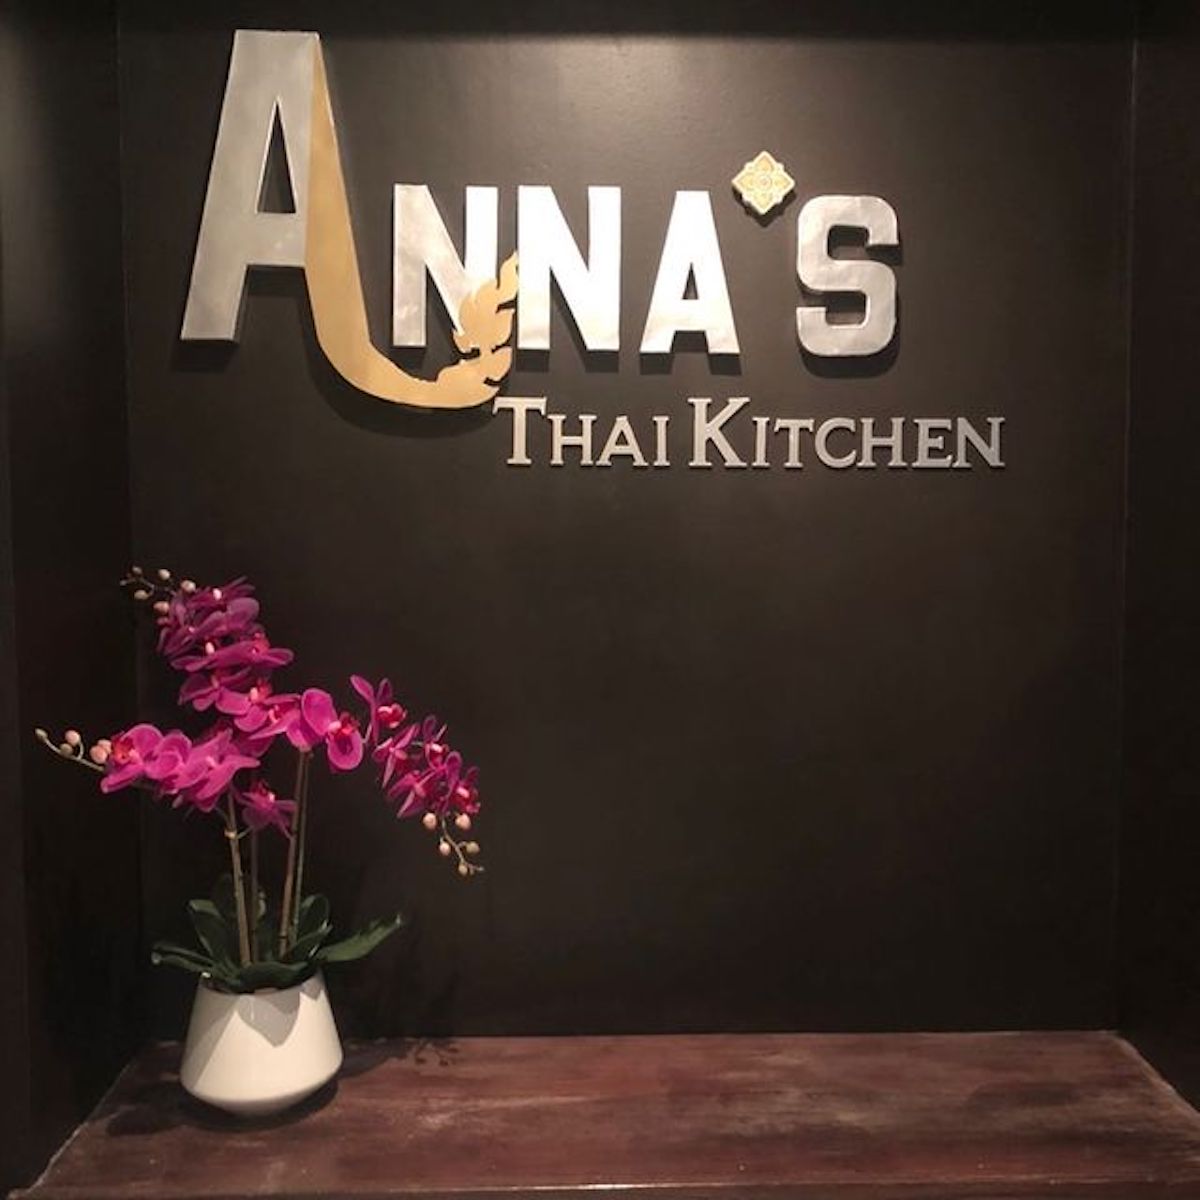 Authentic and Delicious Flavors Coming Soon from Anna’s Thai Kitchen